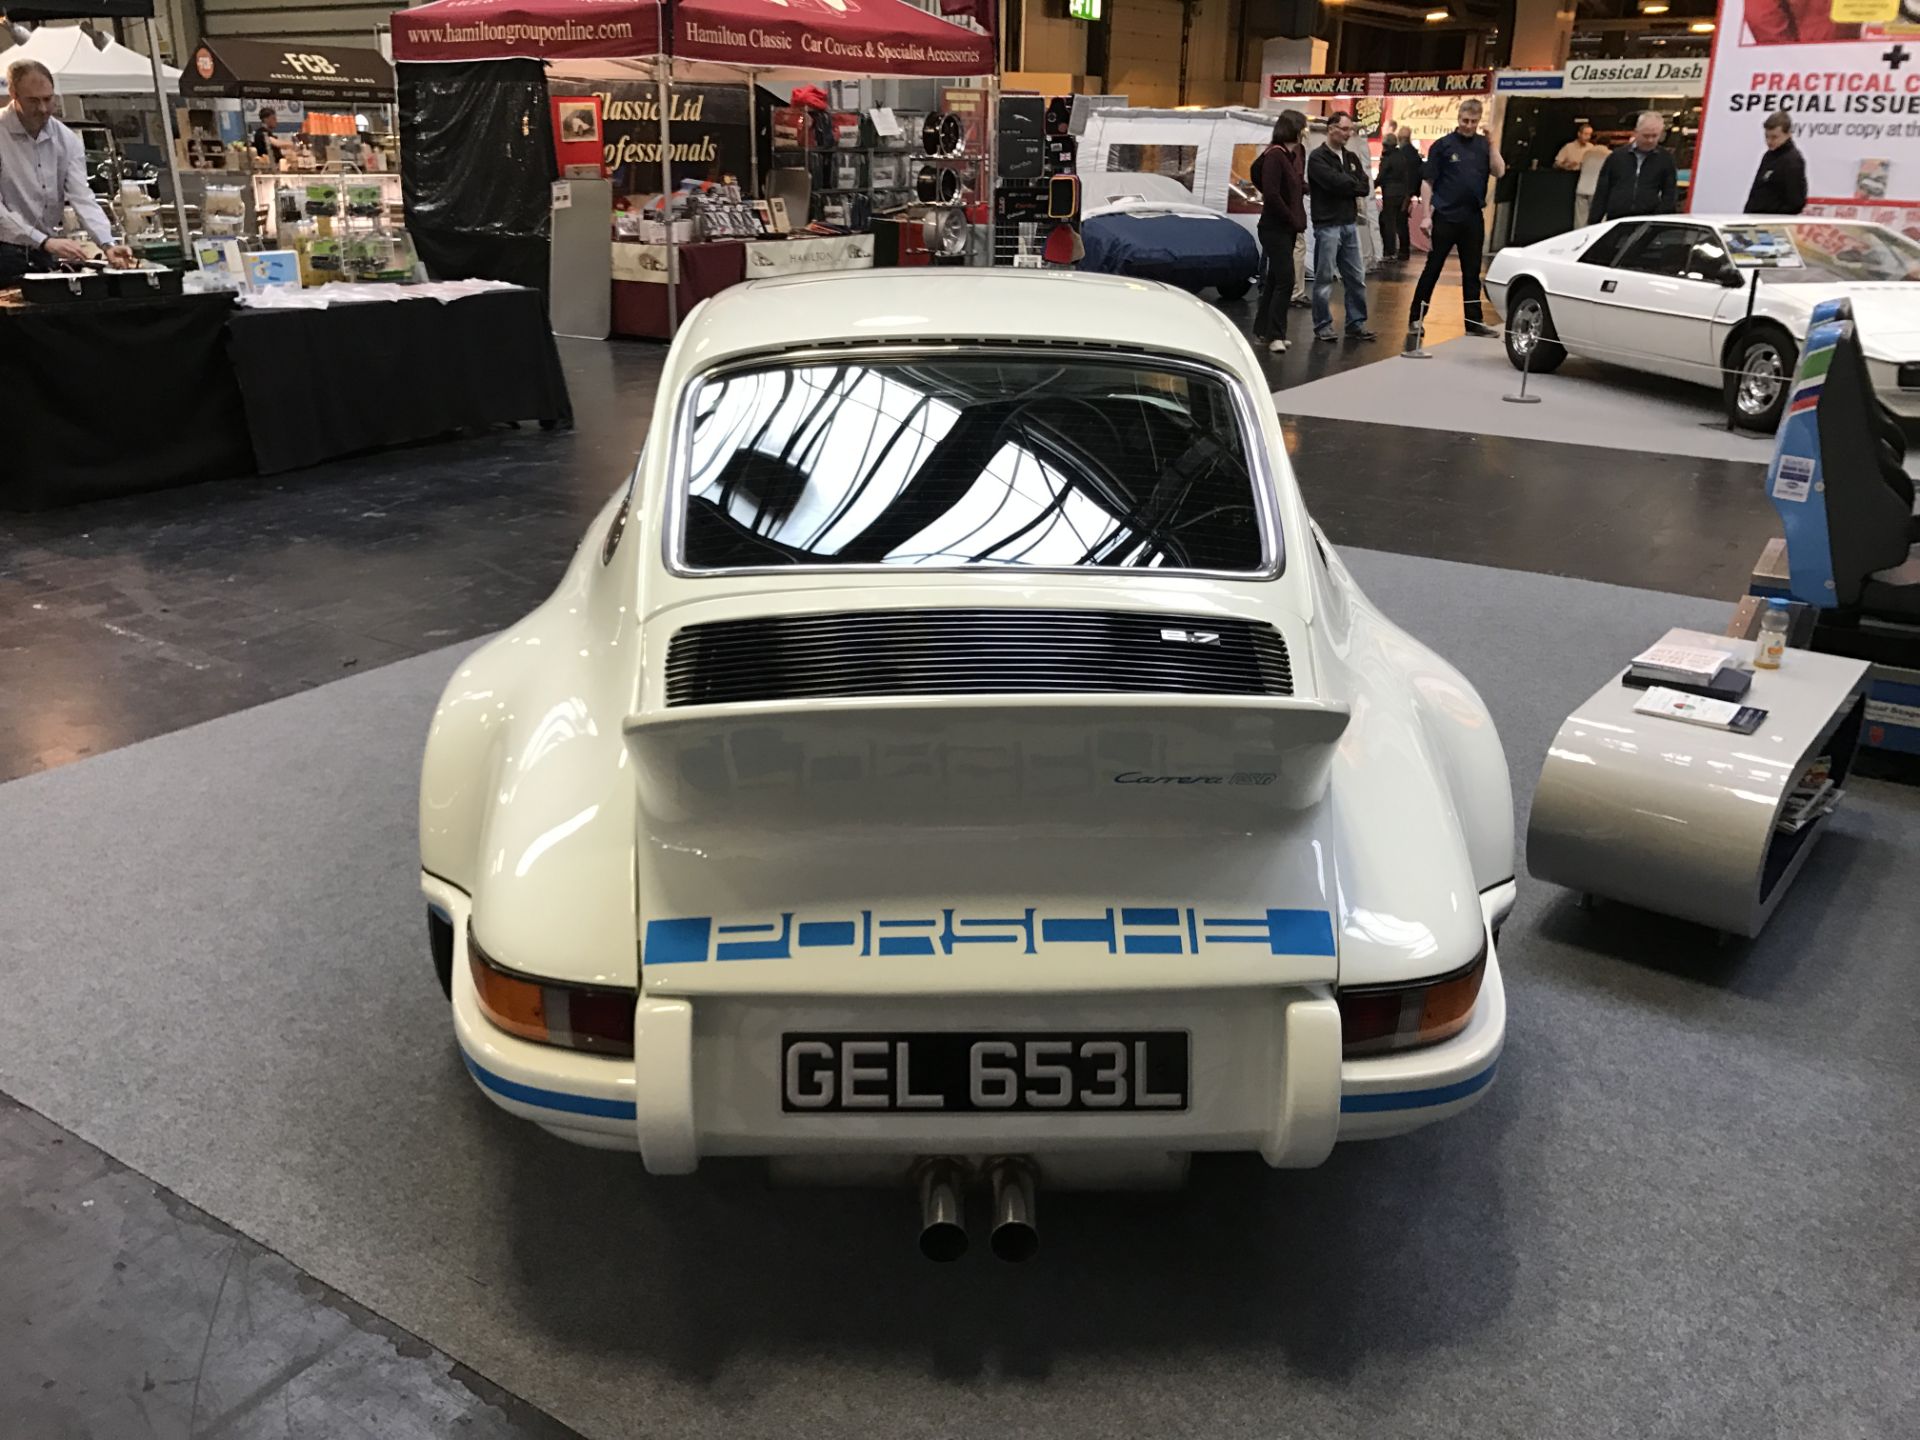 Porsche 911 Carrera 2.7 Rs Recreation - Pro 9 Build Based On A 1986 Porsche 911 **Reserve reduced** - Image 4 of 21